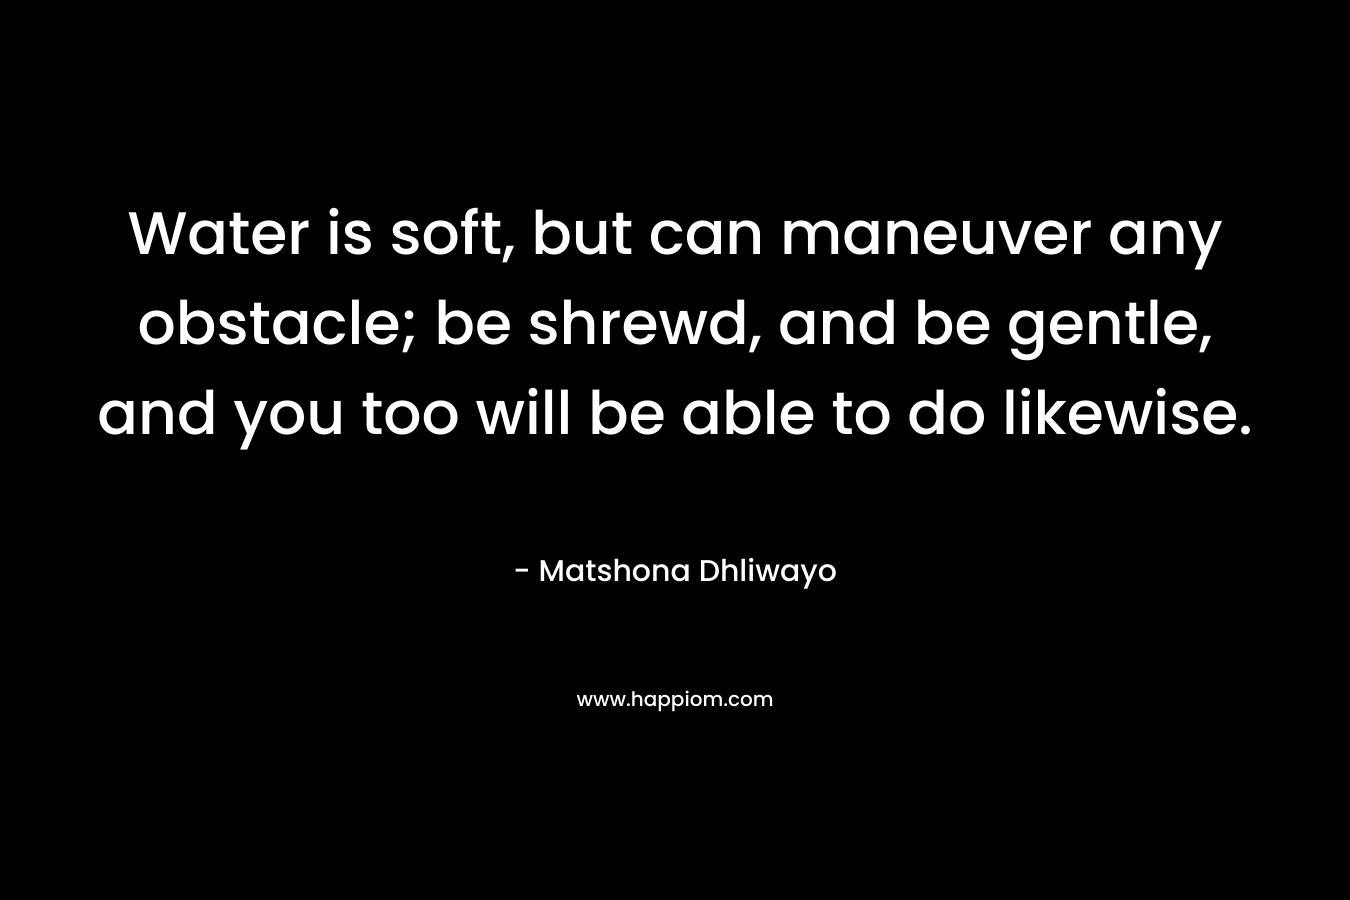 Water is soft, but can maneuver any obstacle; be shrewd, and be gentle, and you too will be able to do likewise. – Matshona Dhliwayo